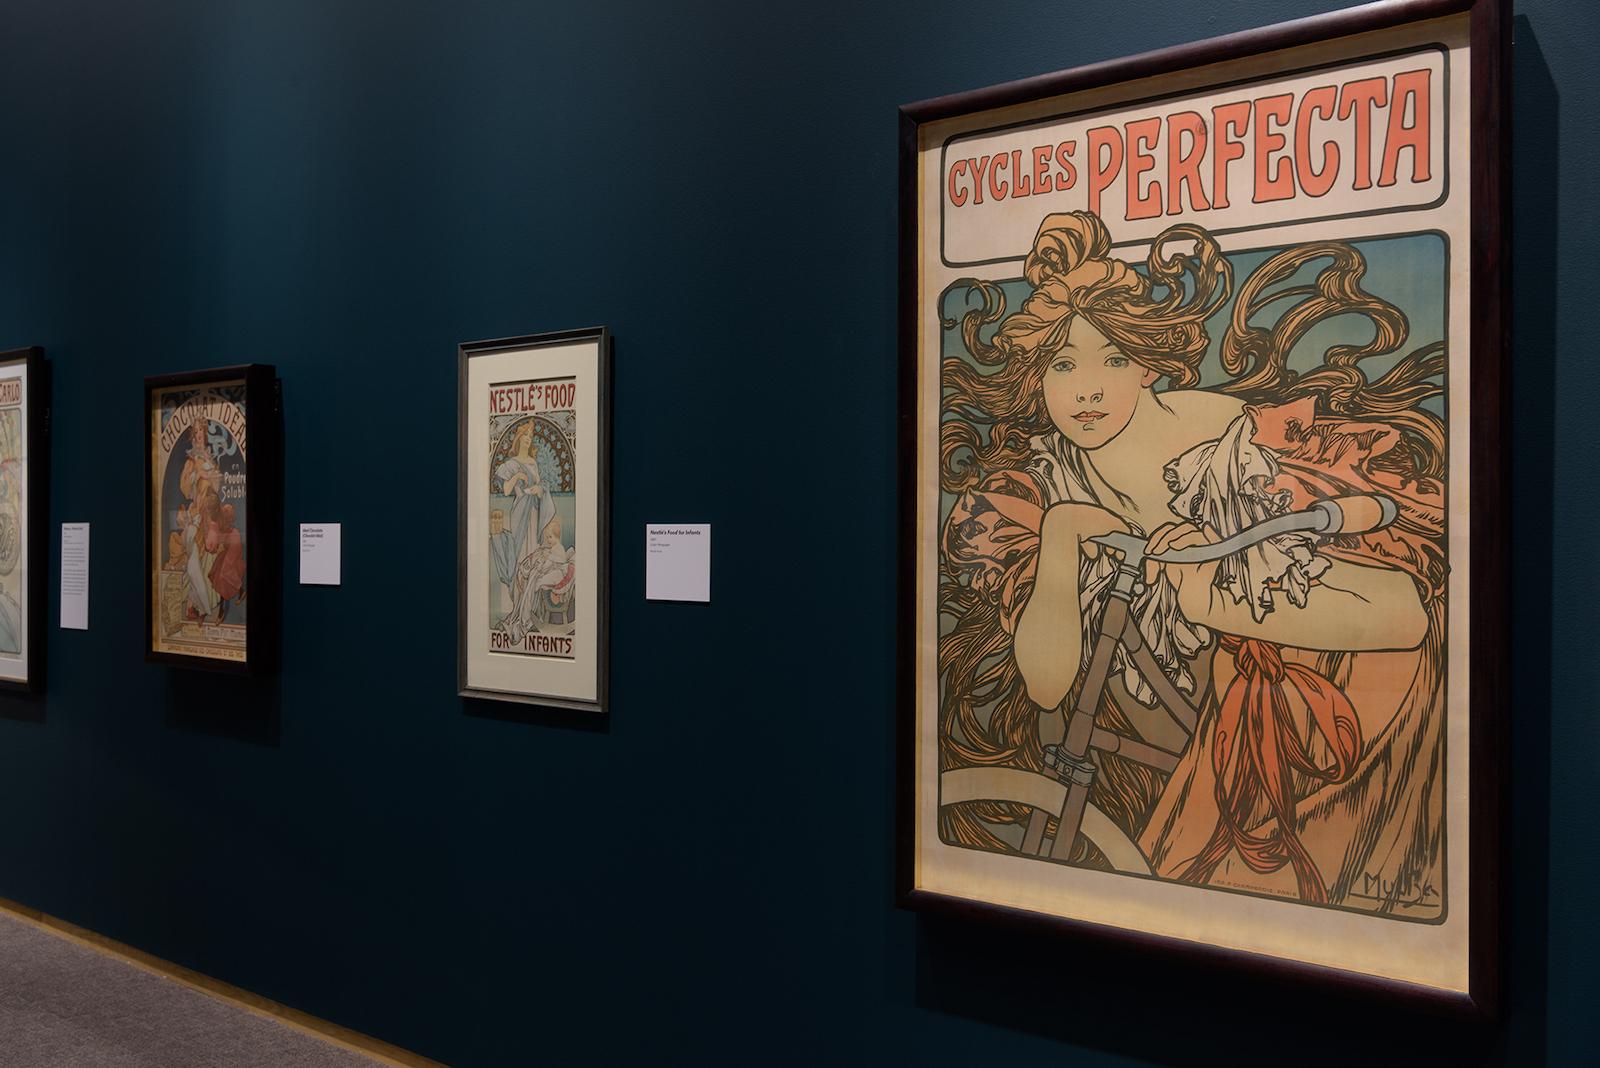 Installation view of Alphonse Mucha: Art Nouveau Visionary featuring Cycles Perfecta.